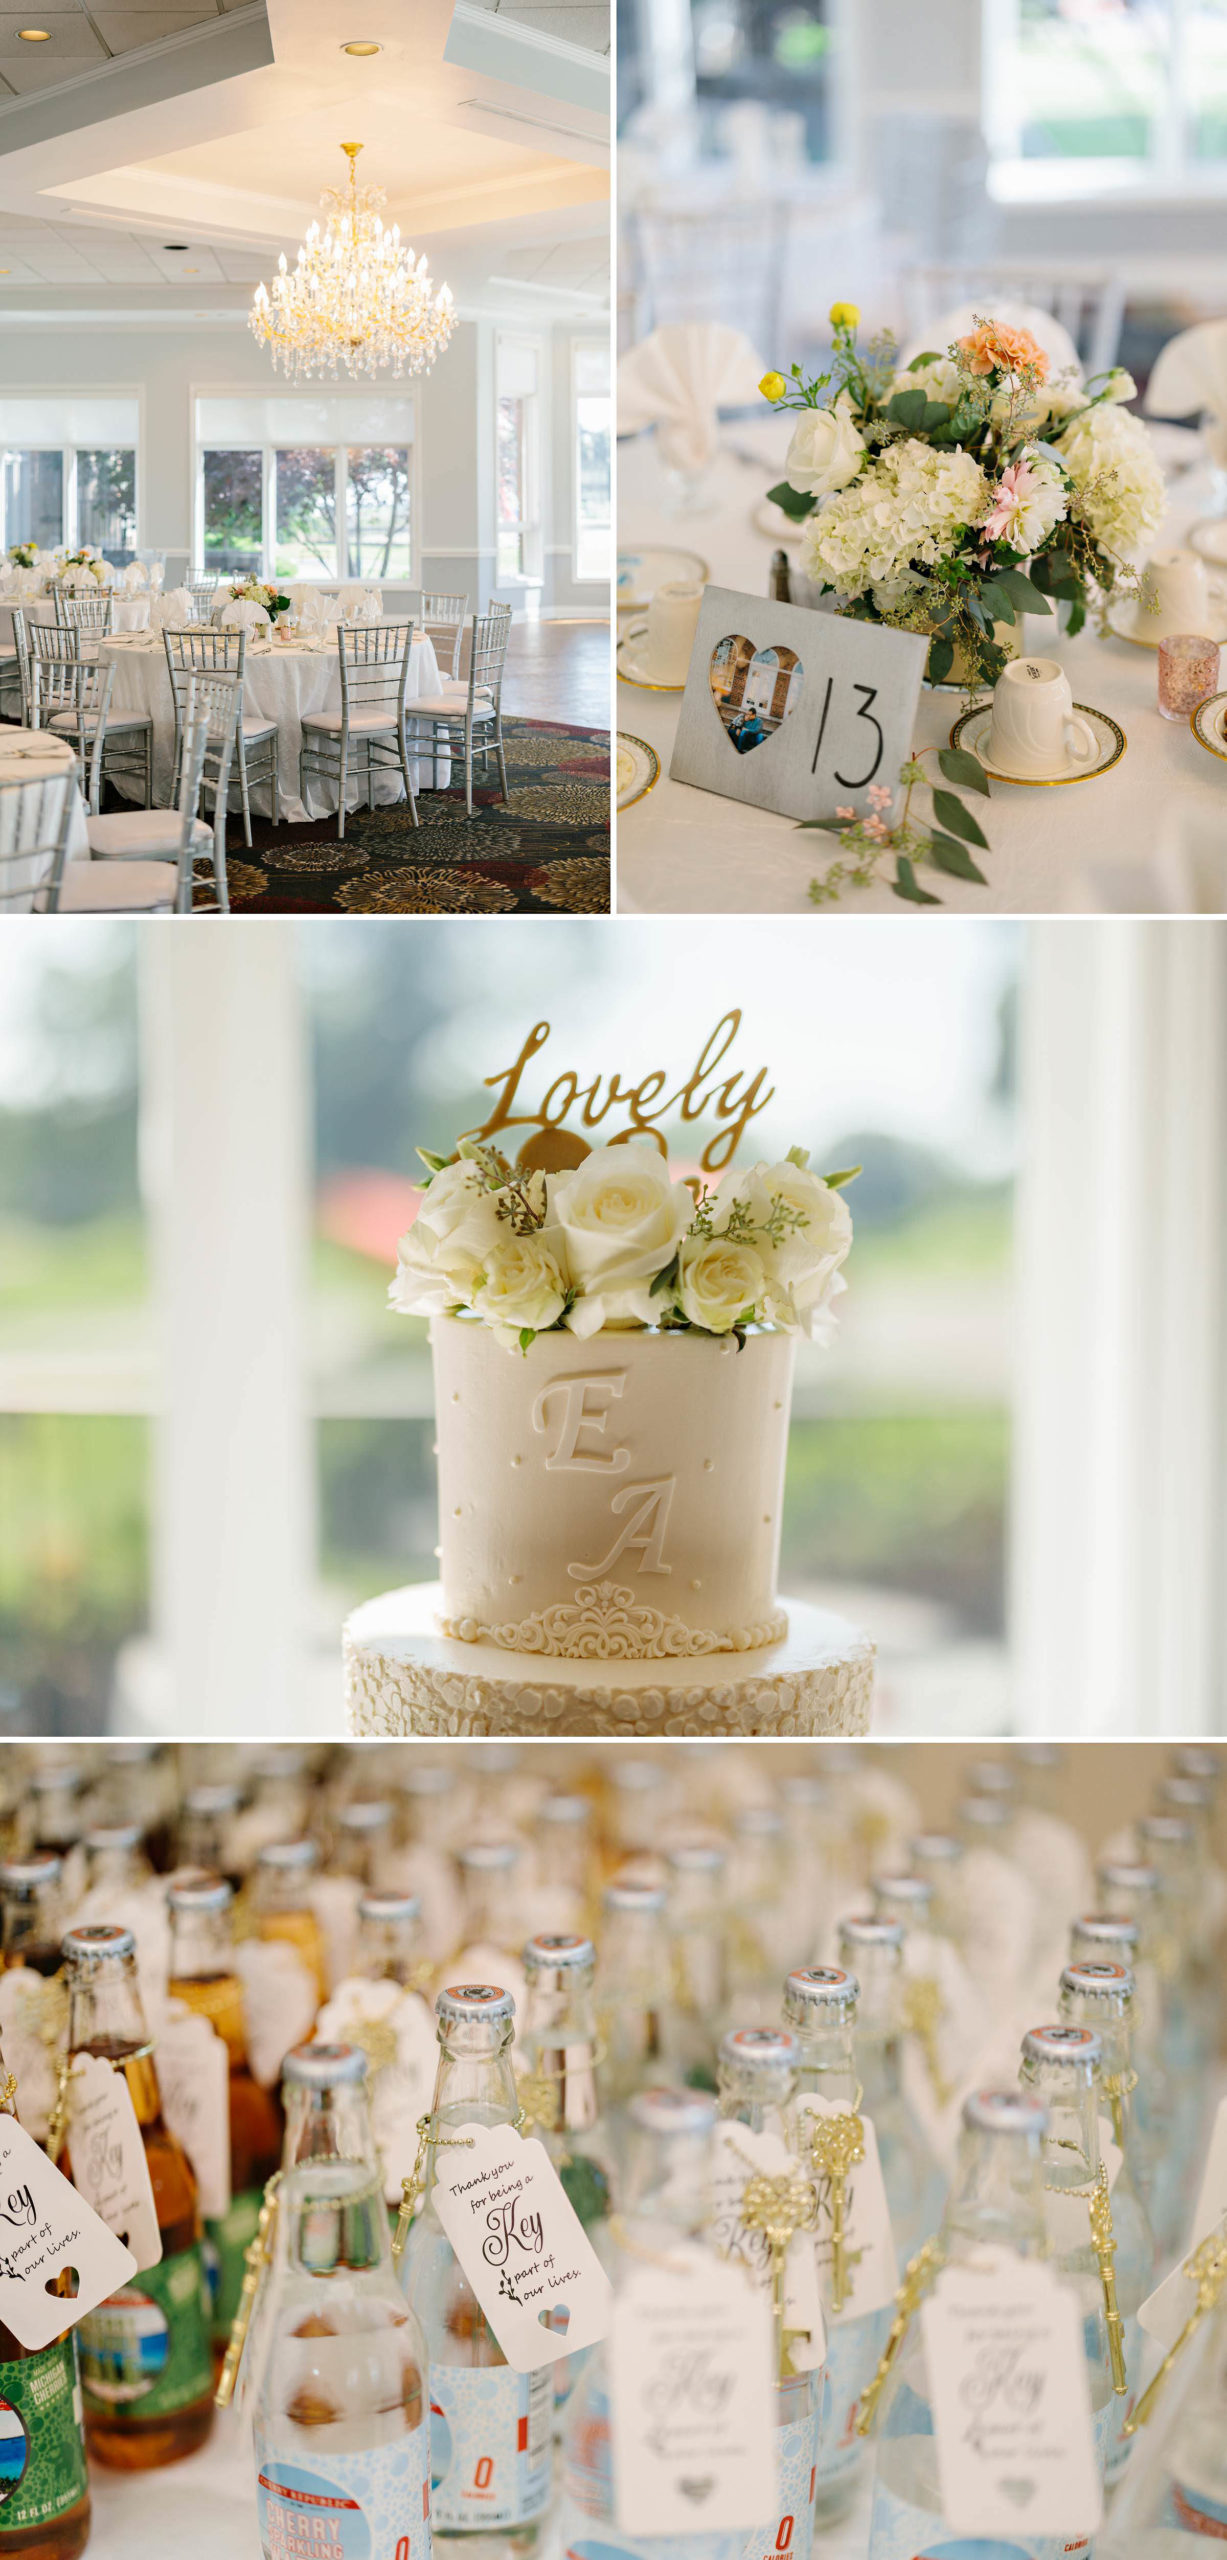 Reception details; chandelier; table settings; table centerpieces; wedding cake; wedding favors at the Grosse Ile Country Club by Detroit Wedding Photographer Michele Maloney